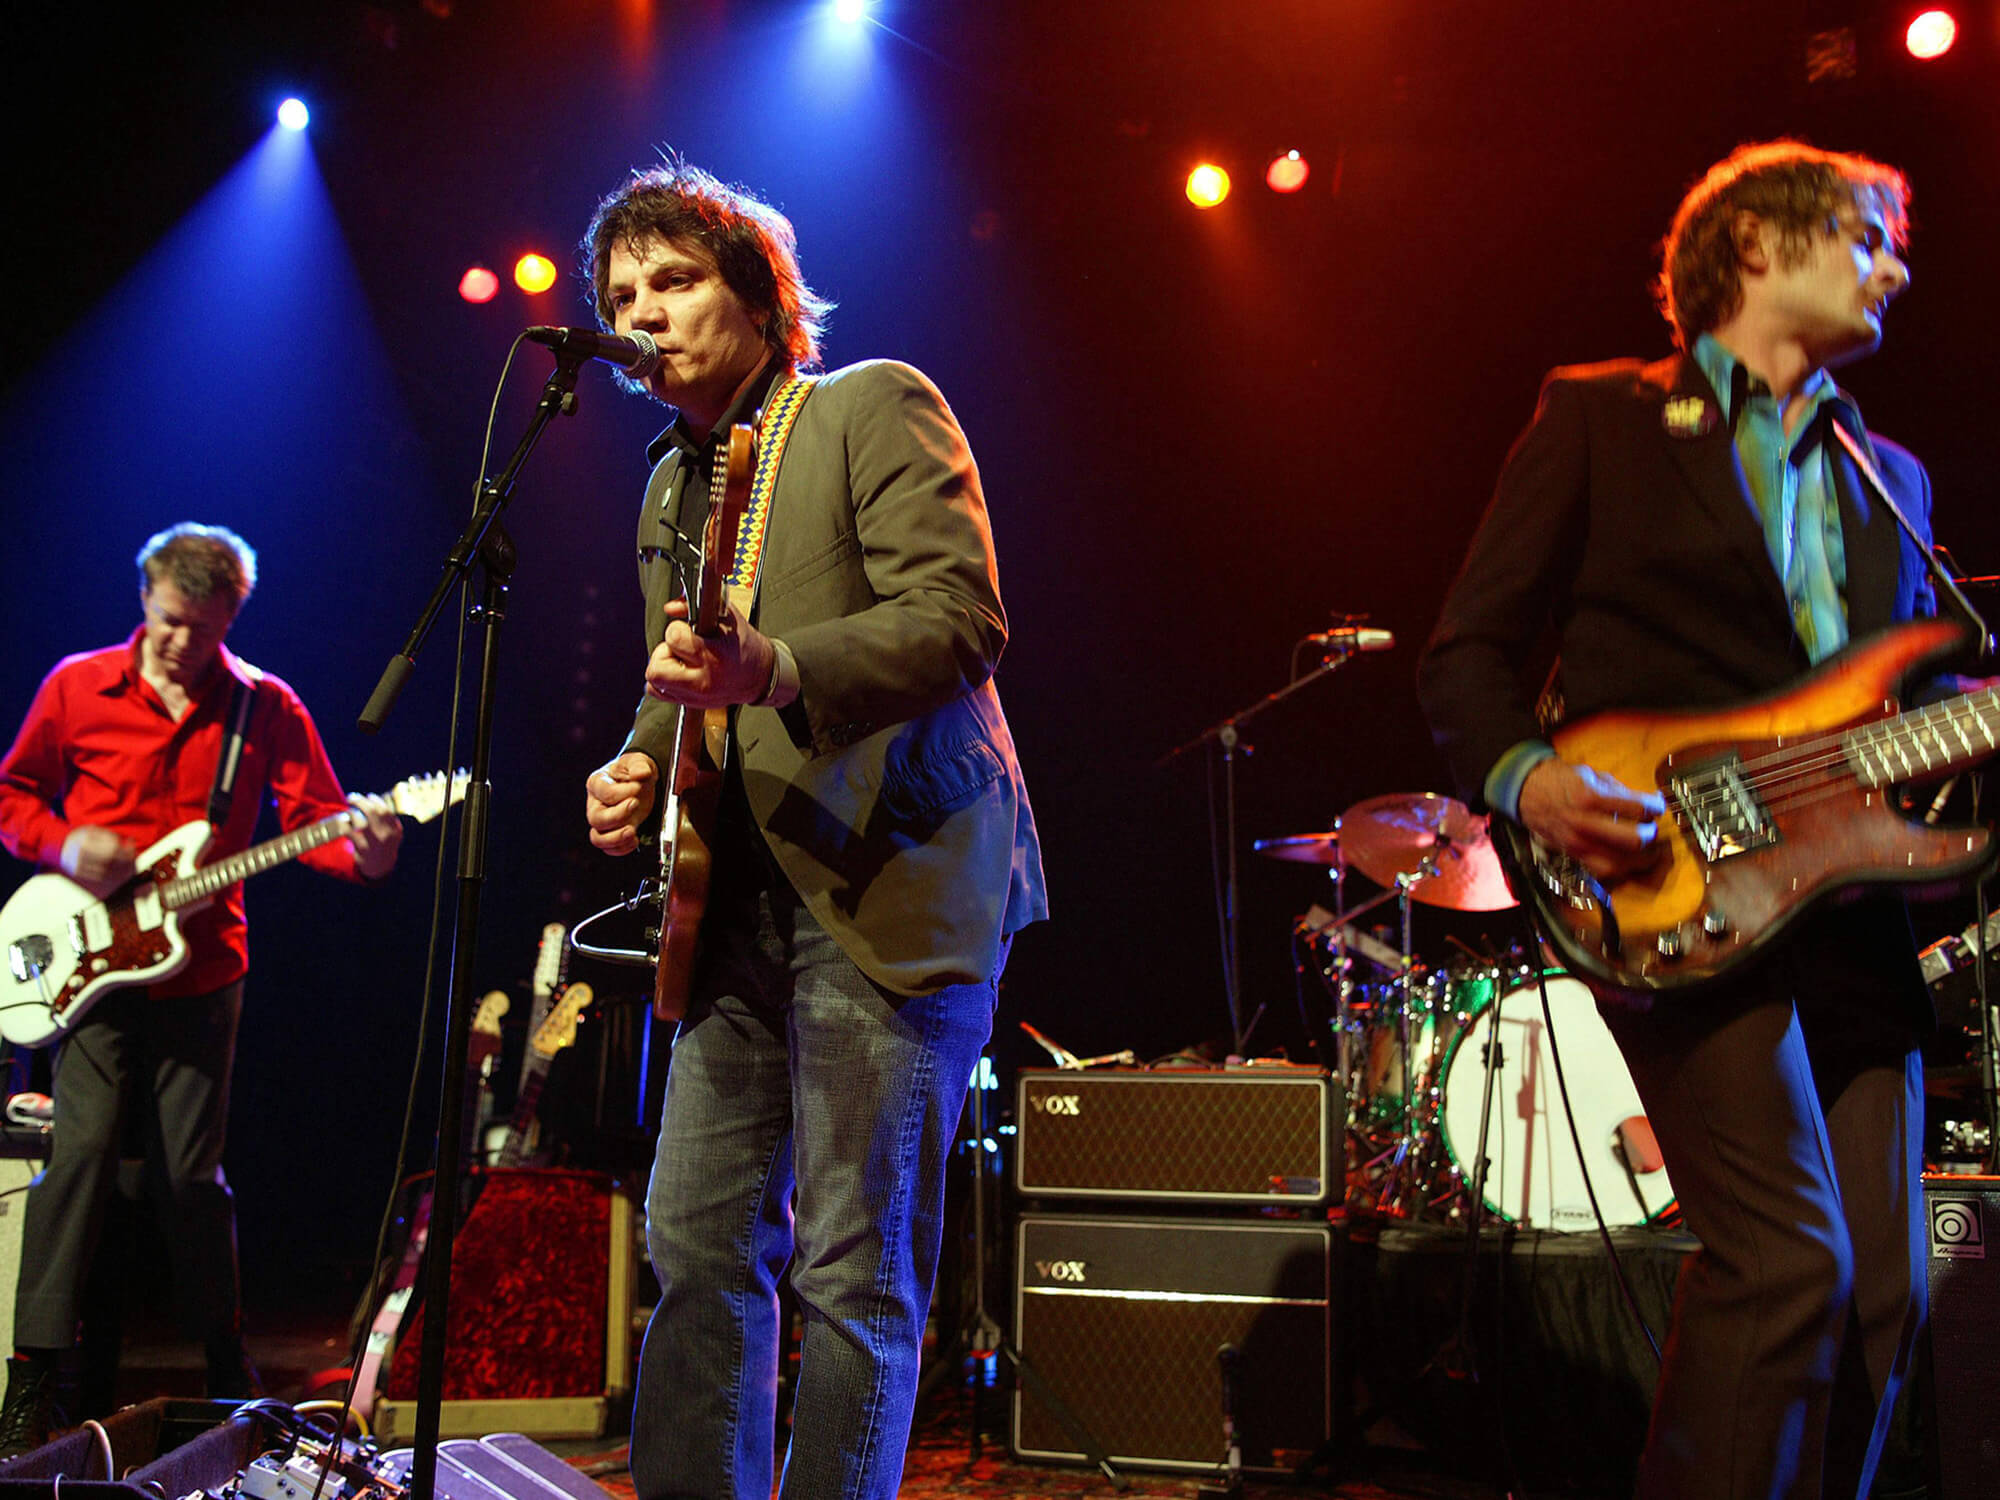 Wilco performing in 2005, photo by Mick Hutson/Redferns via Getty Images